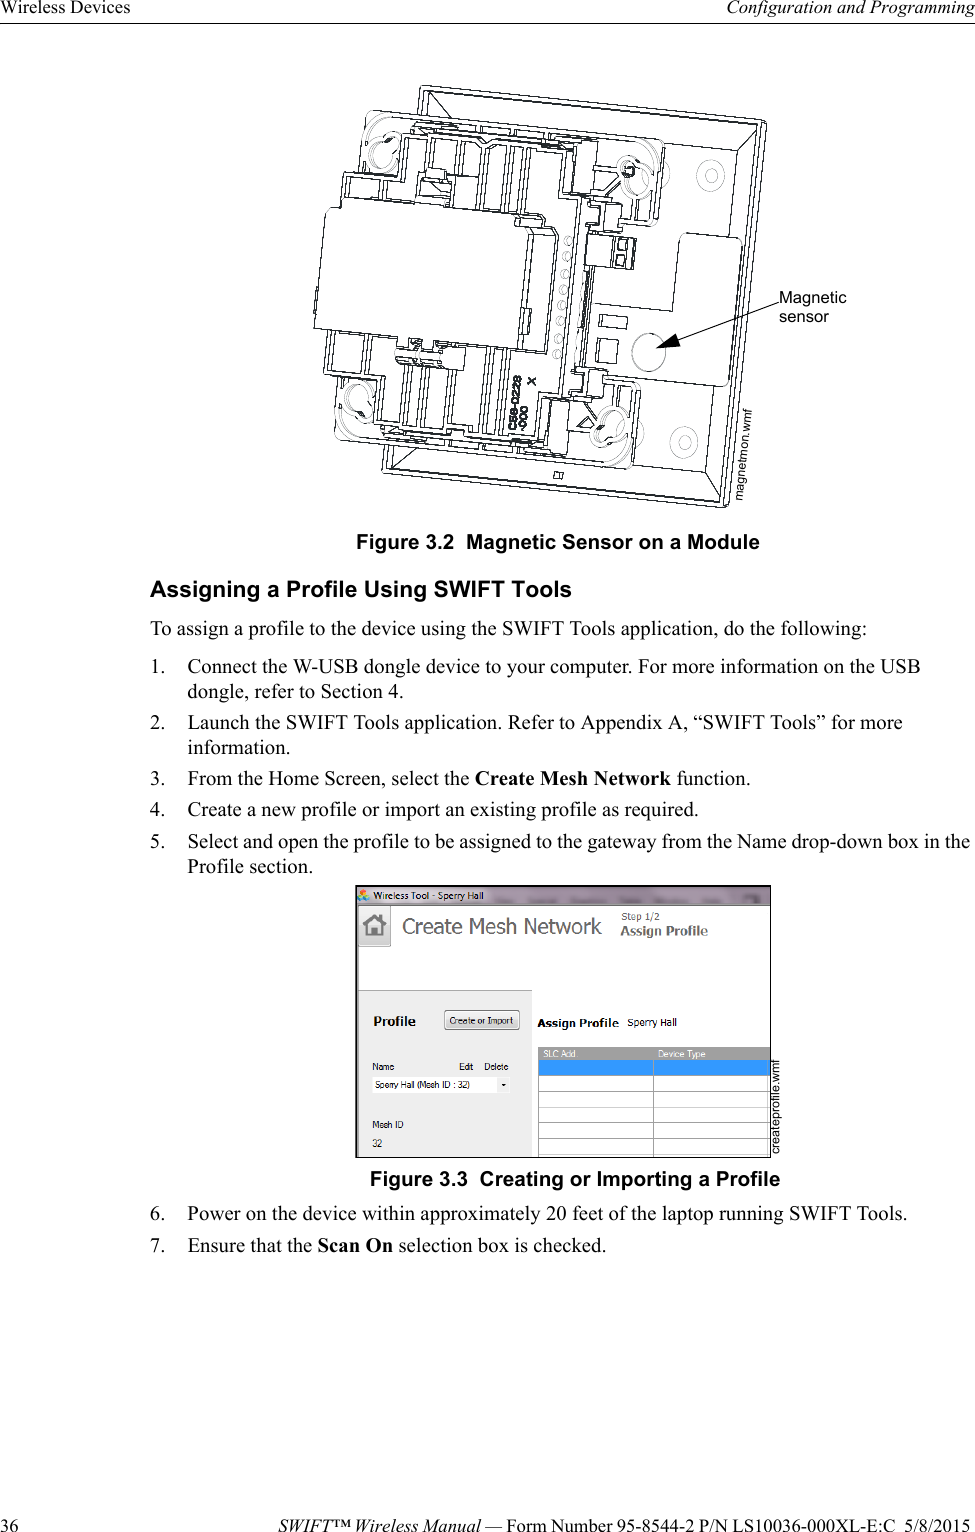 36 SWIFT™ Wireless Manual — Form Number 95-8544-2 P/N LS10036-000XL-E:C  5/8/2015 Wireless Devices Configuration and ProgrammingAssigning a Profile Using SWIFT ToolsTo assign a profile to the device using the SWIFT Tools application, do the following:1. Connect the W-USB dongle device to your computer. For more information on the USB dongle, refer to Section 4.2. Launch the SWIFT Tools application. Refer to Appendix A, “SWIFT Tools” for more information.3. From the Home Screen, select the Create Mesh Network function.4. Create a new profile or import an existing profile as required. 5. Select and open the profile to be assigned to the gateway from the Name drop-down box in the Profile section.     6. Power on the device within approximately 20 feet of the laptop running SWIFT Tools.7. Ensure that the Scan On selection box is checked.Figure 3.2  Magnetic Sensor on a Modulemagnetmon.wmfMagnetic sensorFigure 3.3  Creating or Importing a Profilecreateprofile.wmf